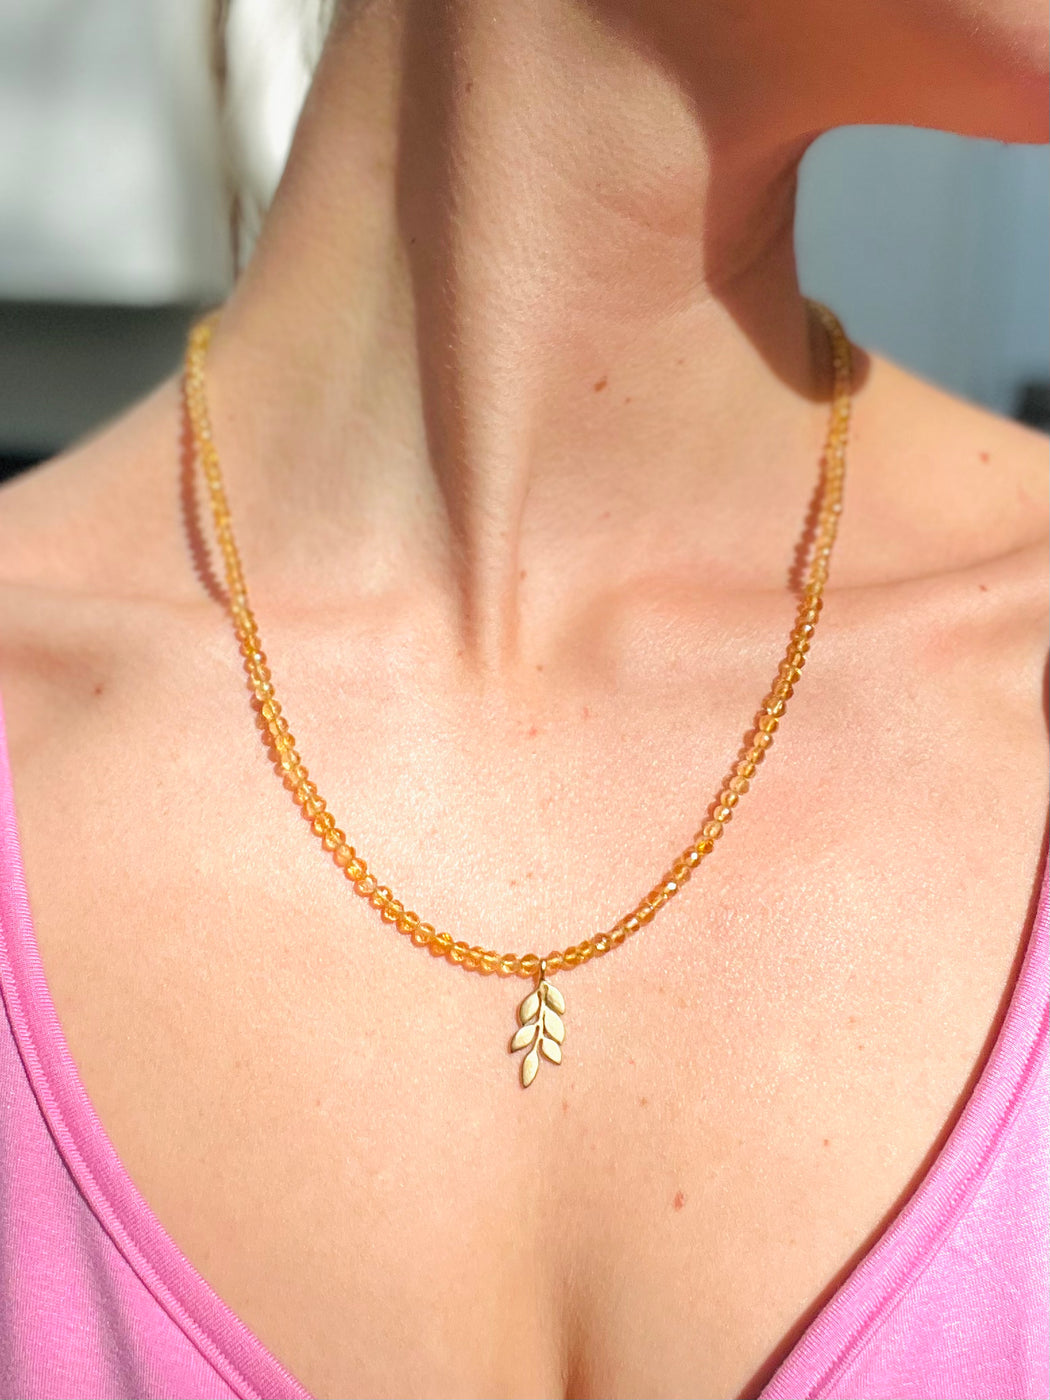 Citrine Necklace - strung on gold coated wire with gold fill clasp. Accented with Leaf charm. PUNKWASP by Carrie marill